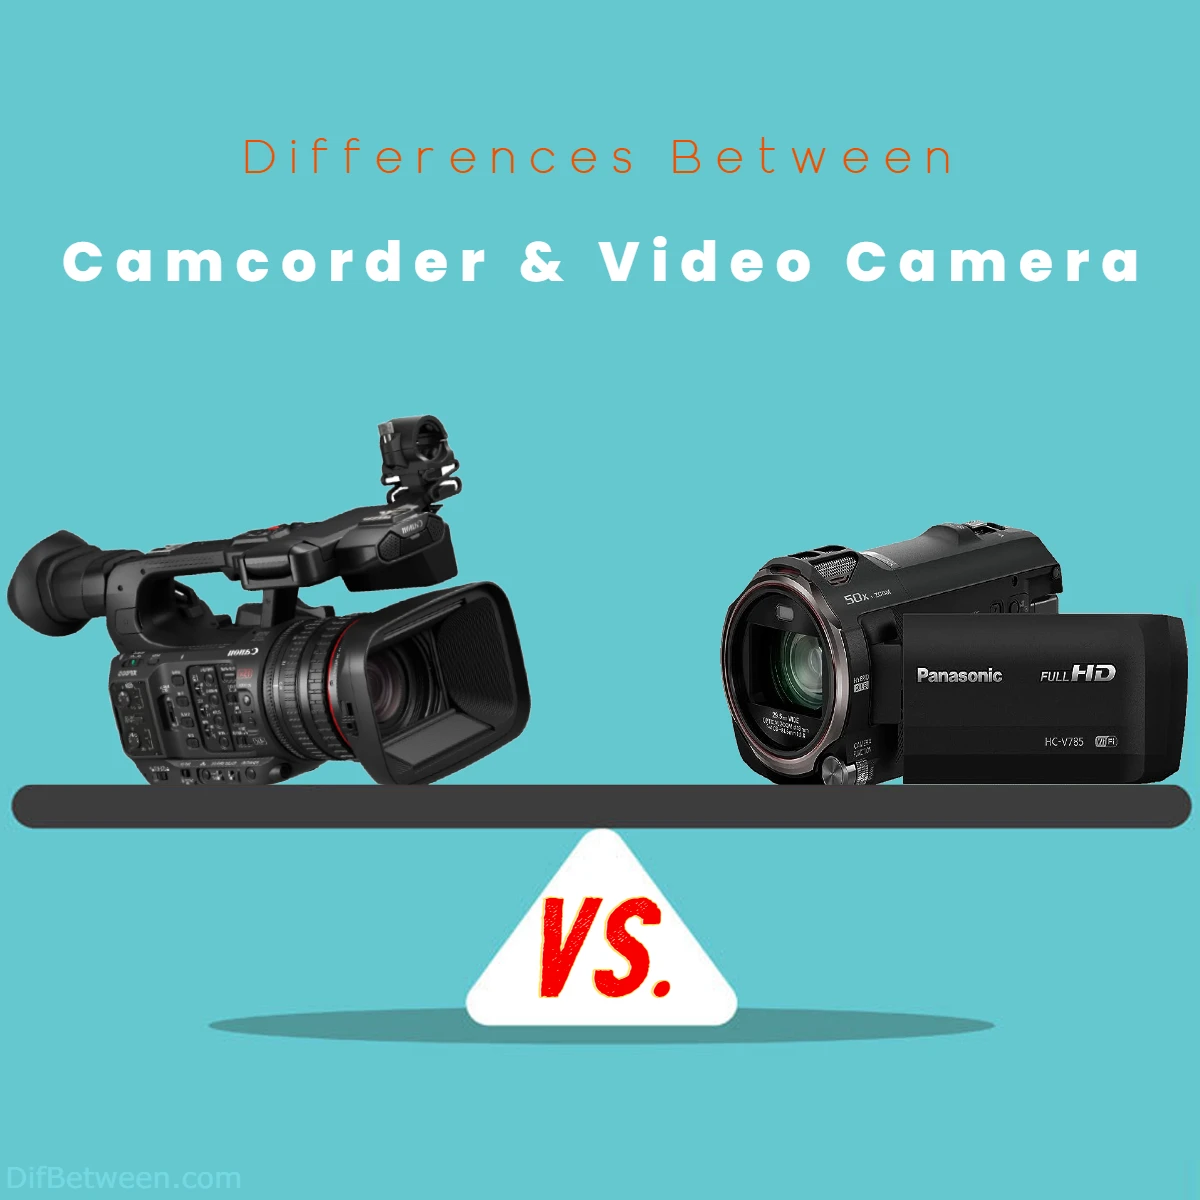 Difference Between Video Camera and Camcorder